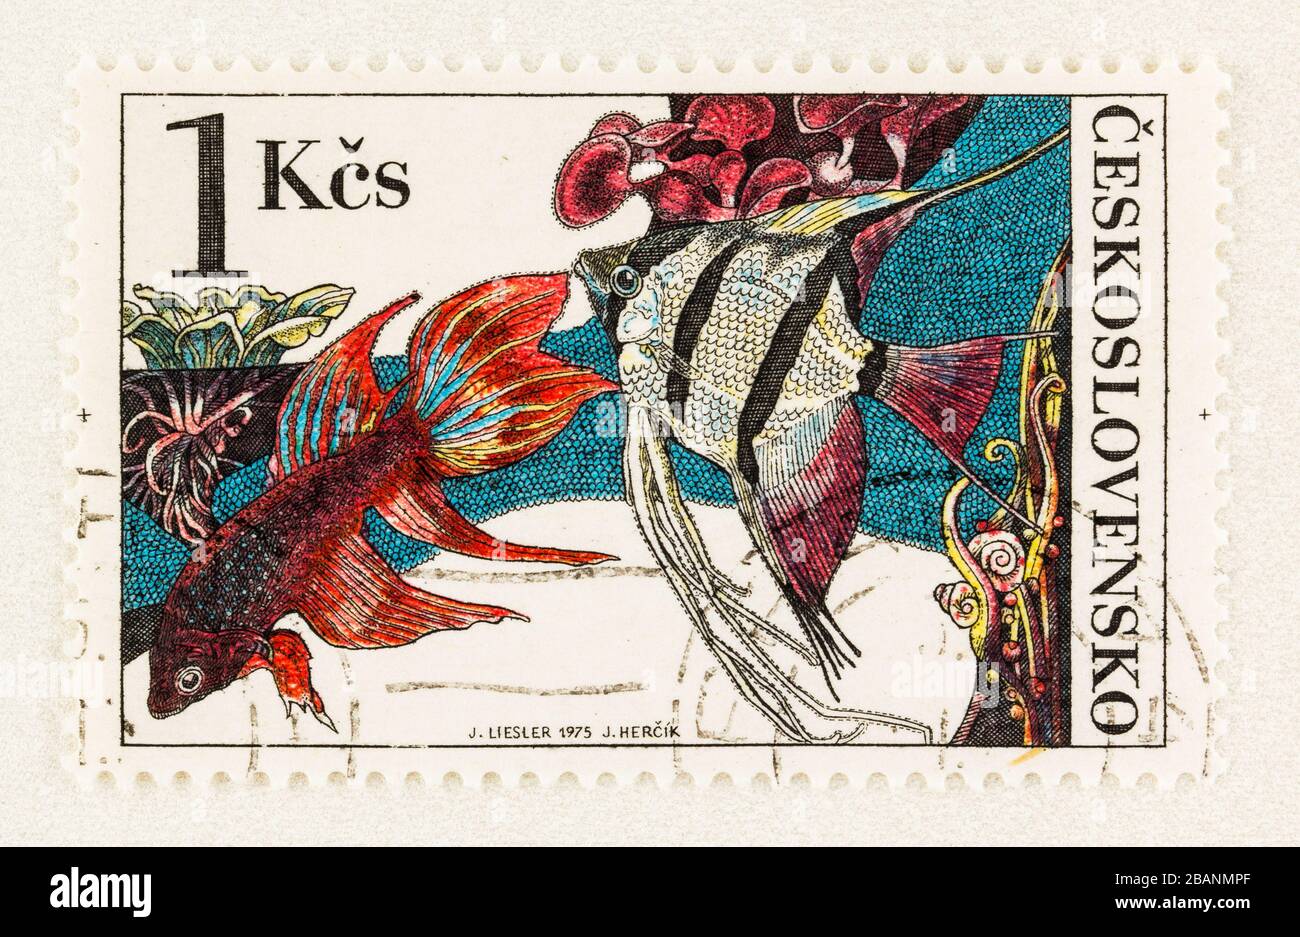 SEATTLE WASHINGTON - March 27, 2020: Close up of used Czechoslovakia postage stamp featuring popular freshwater  aquarium fighting fish and angelfish. Stock Photo